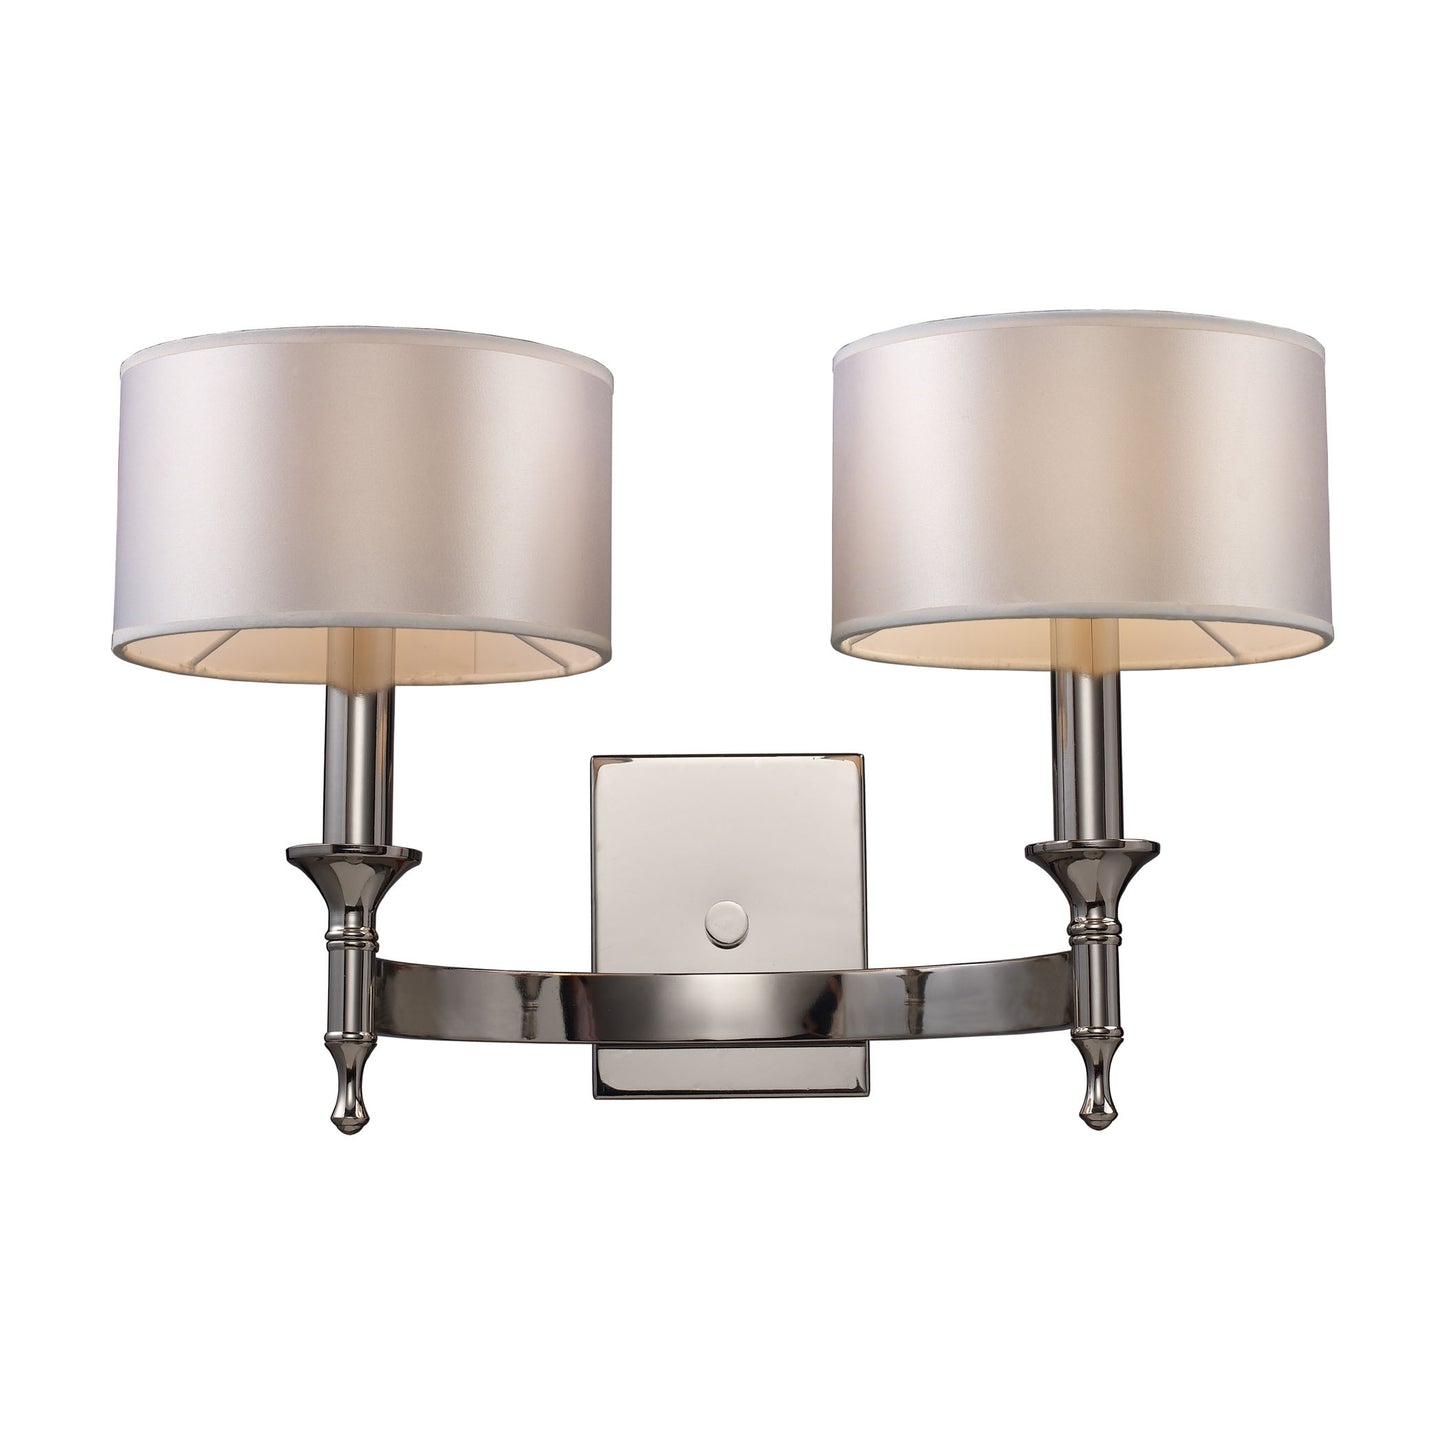 ELK Lighting 10122/2 - Pembroke 19" Wide 2-Light Wall Lamp in Polished Nickel with White Fabric Shad